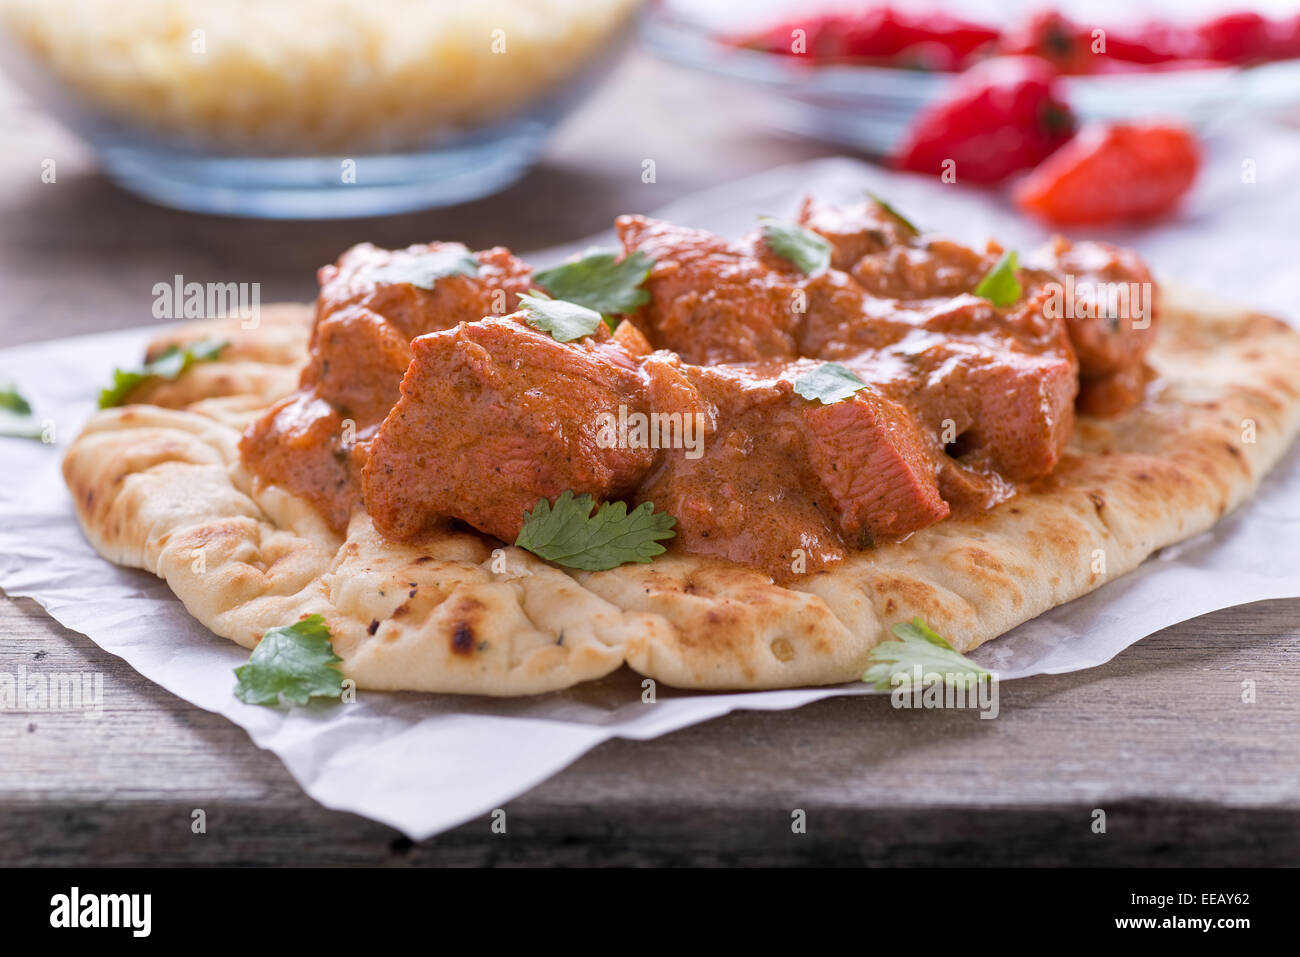 A delicious butter chicken curry served on naan bread with saffron basmati rice. Stock Photo